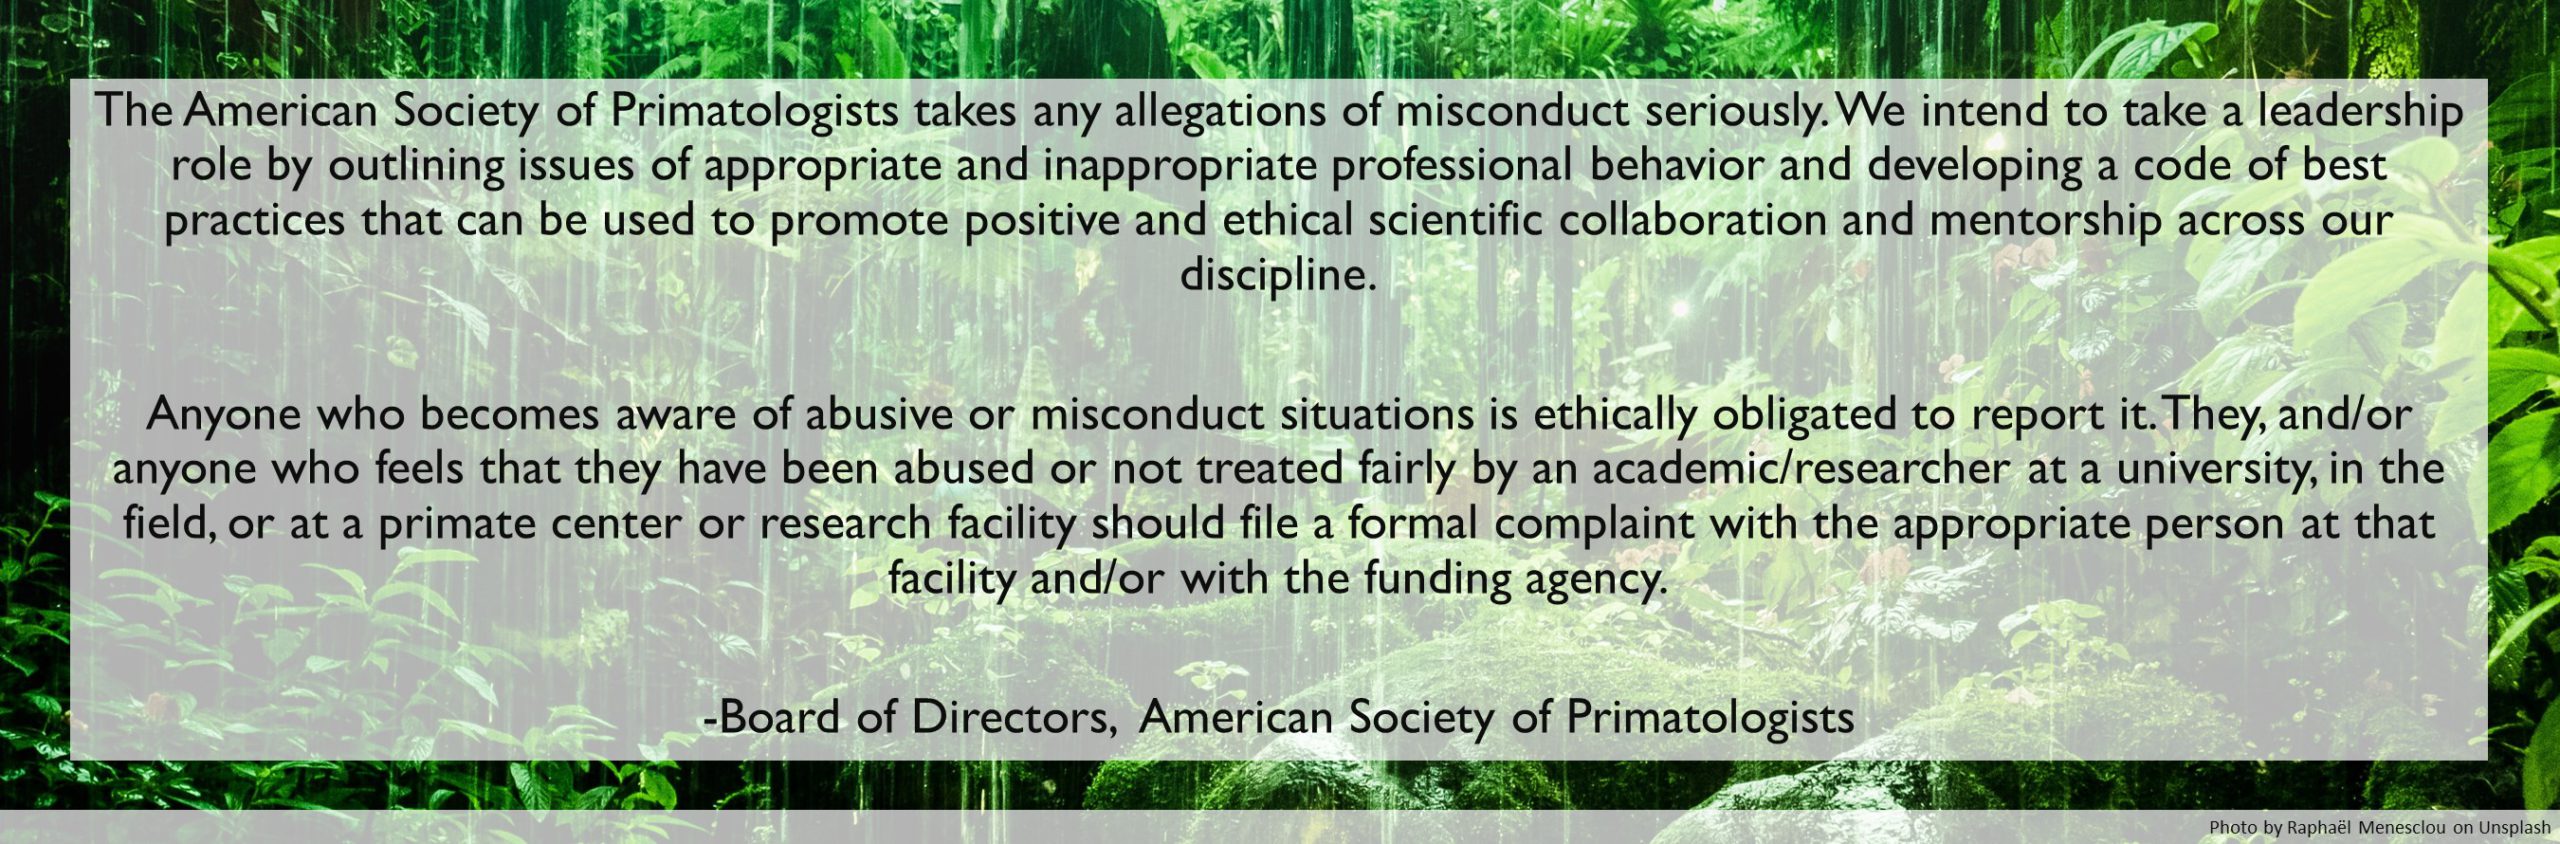 Statement from the ASP Board of Directors on a dark green leafy background. Statement reads: The American Society of Primatologists takes any allegations of misconduct seriously. We intend to take a leadership role by outlining issues of appropriate and inappropriate professional behavior and developing a code of best practices that can be used to promote positive and ethical scientific collaboration and mentorship across our discipline. Anyone who becomes aware of abusive or misconduct situations is ethically obligated to report it. They, and/or anyone who feels that they have been abused or not treated fairly by an academic/researcher at a university, in the field, or at a primate center or research facility should file a formal complaint with the appropriate person at that facility and/or with the funding agency. Photo from Unsplash.